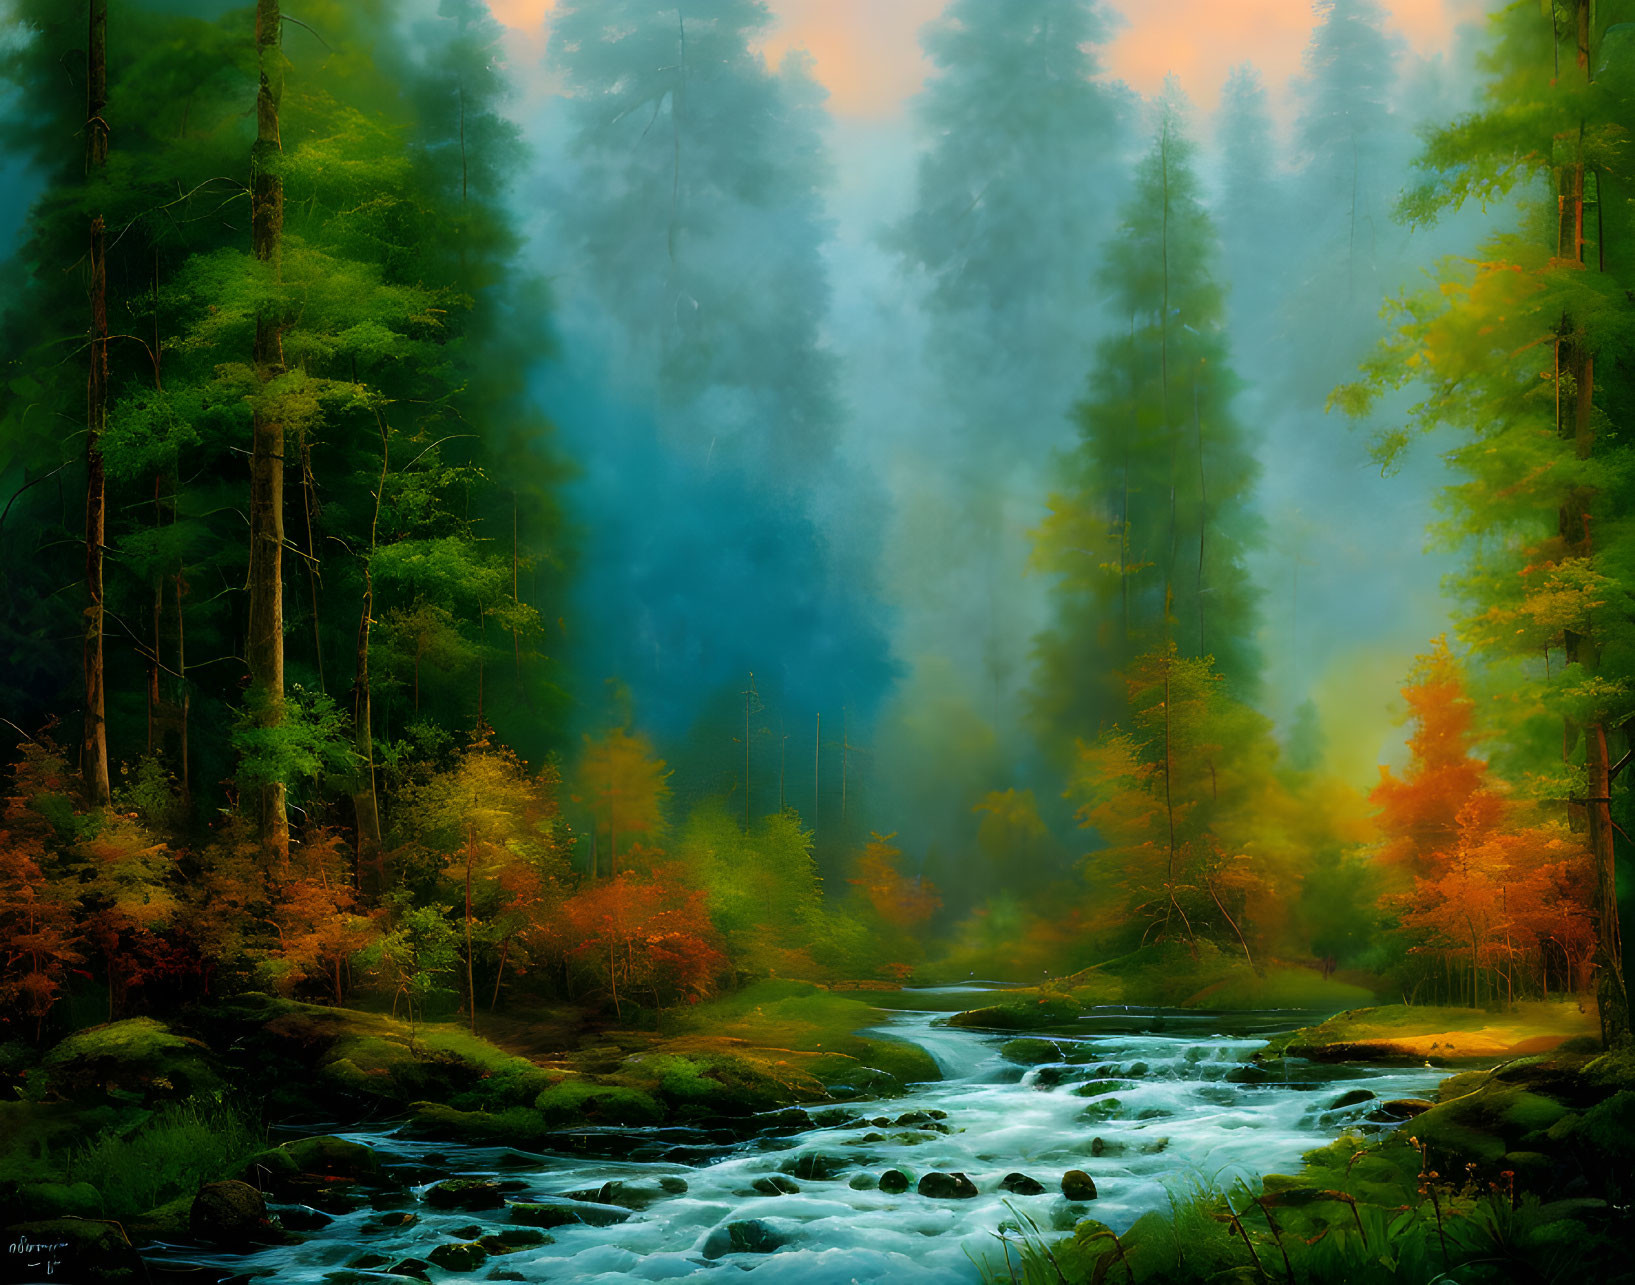 Tranquil Forest Landscape with River and Autumn Colors